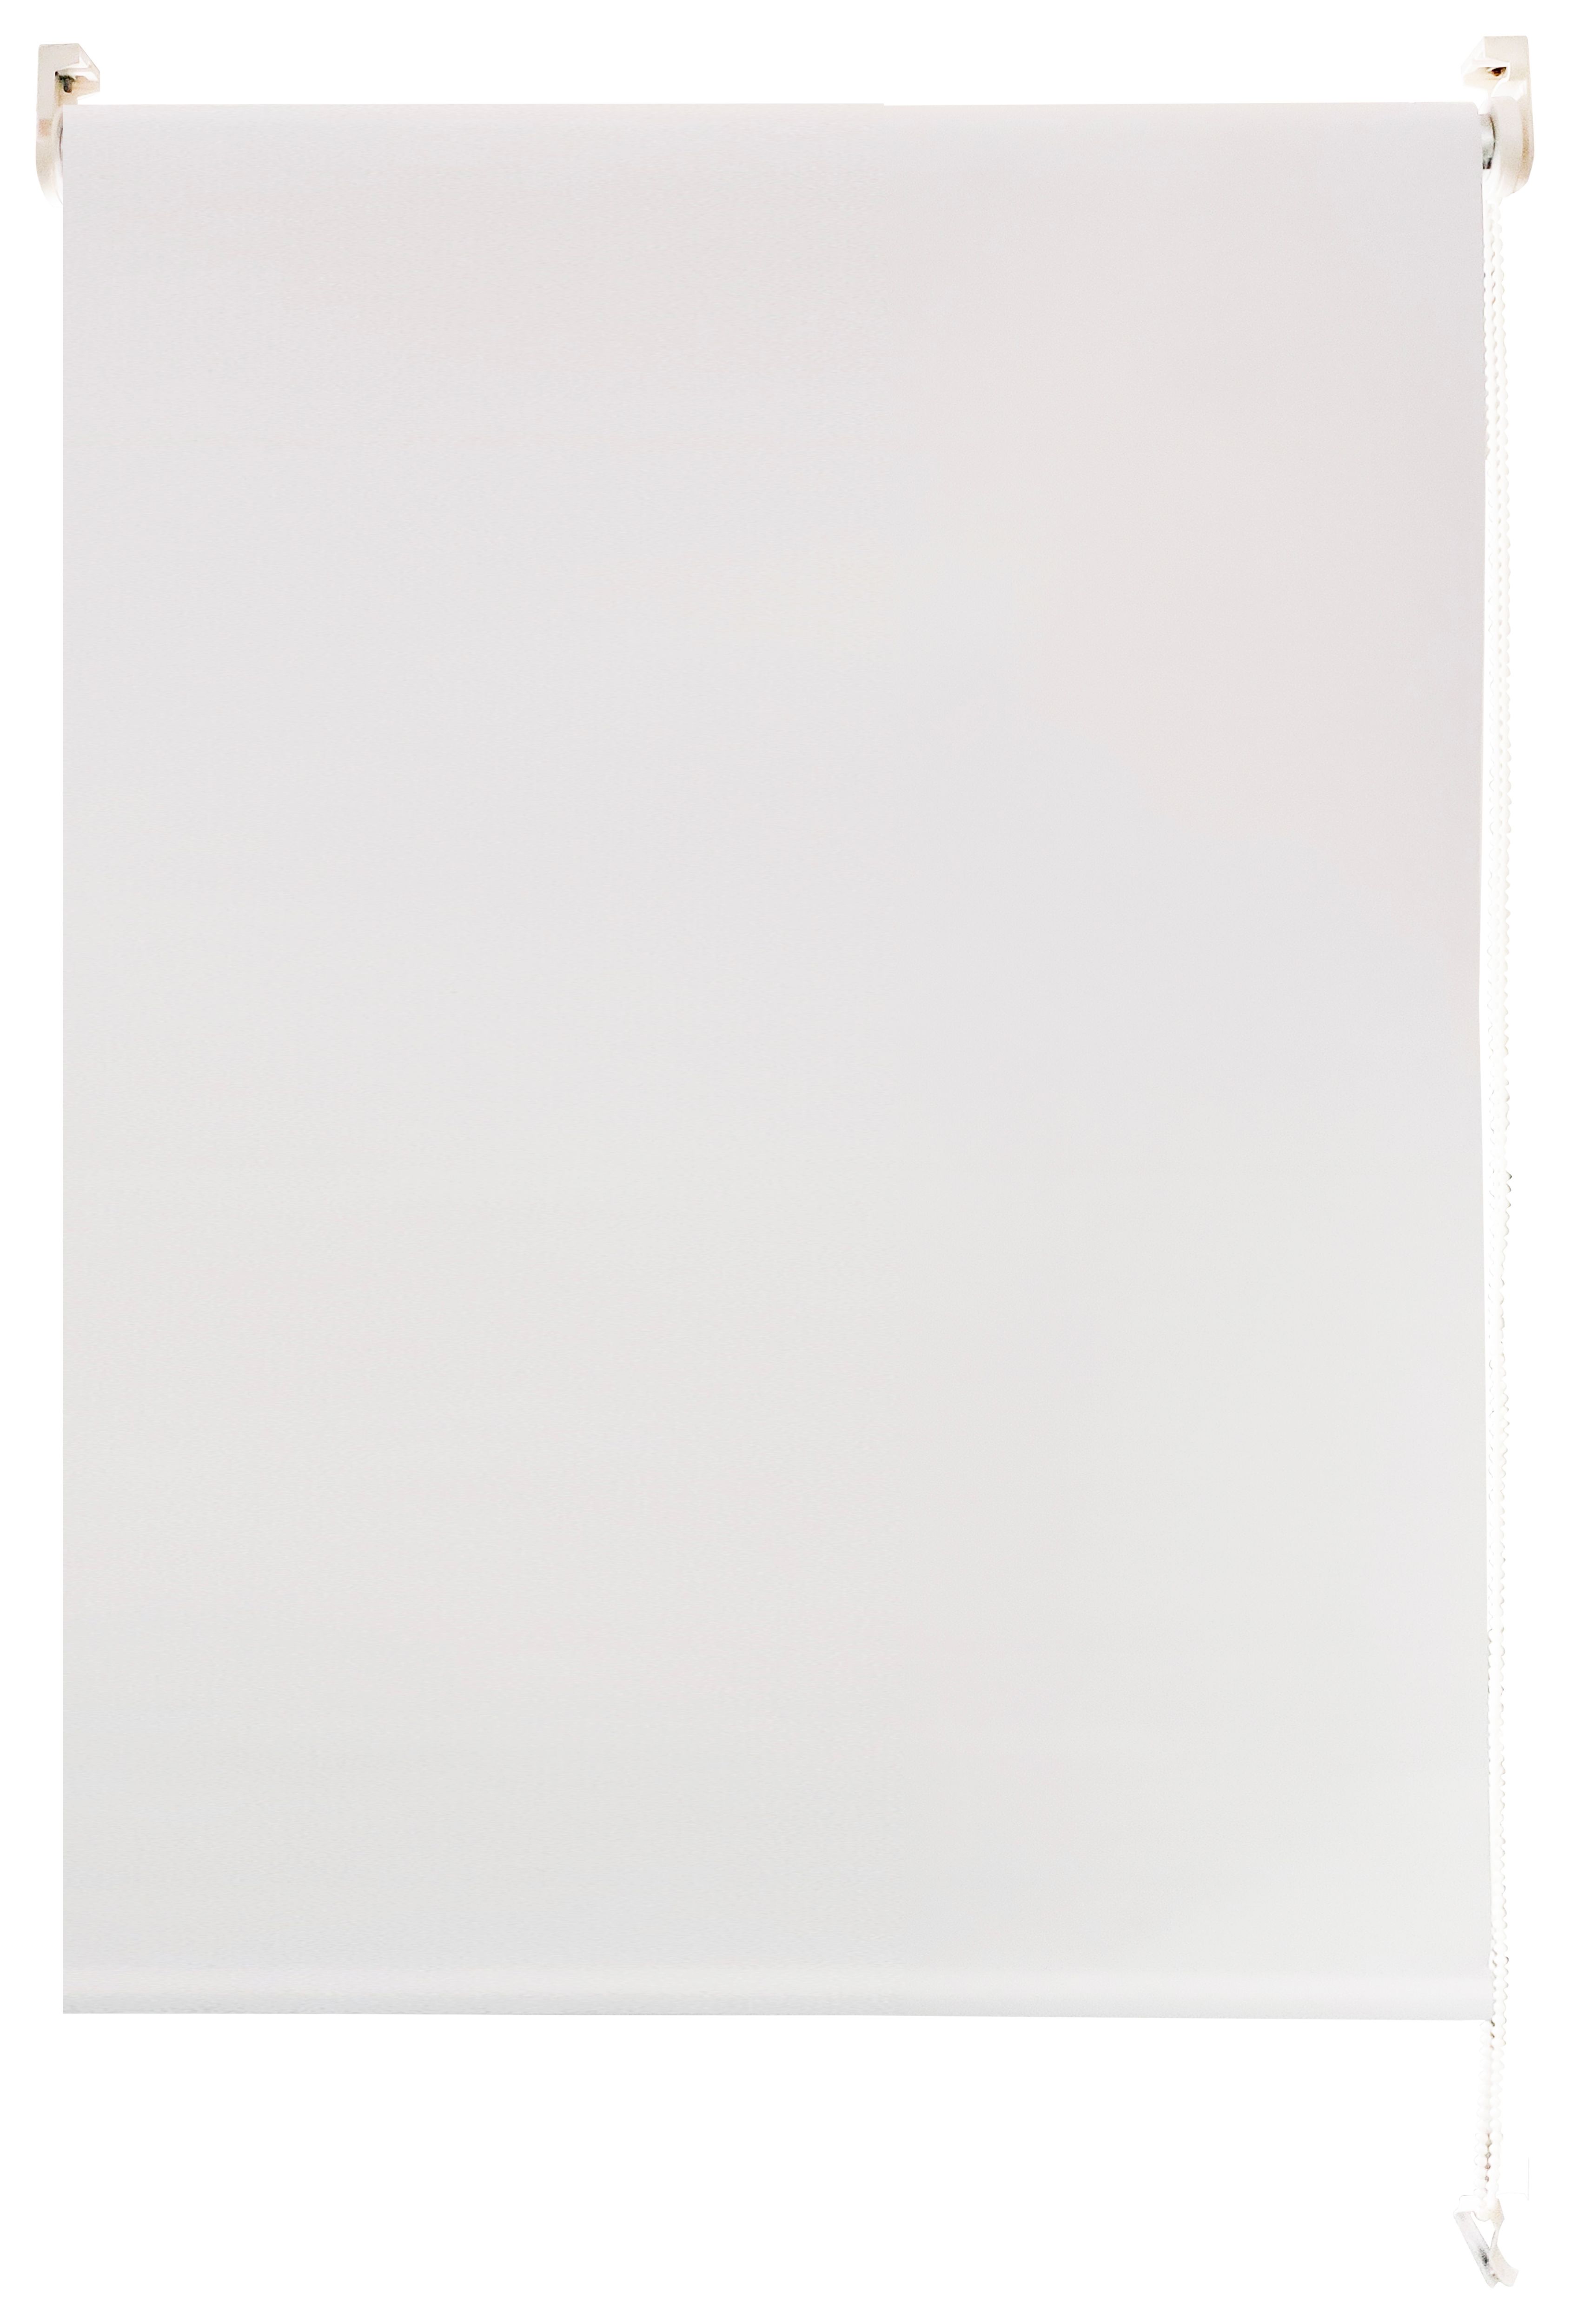 Image of Wickes Blackout Roller Blind White 120x170cm